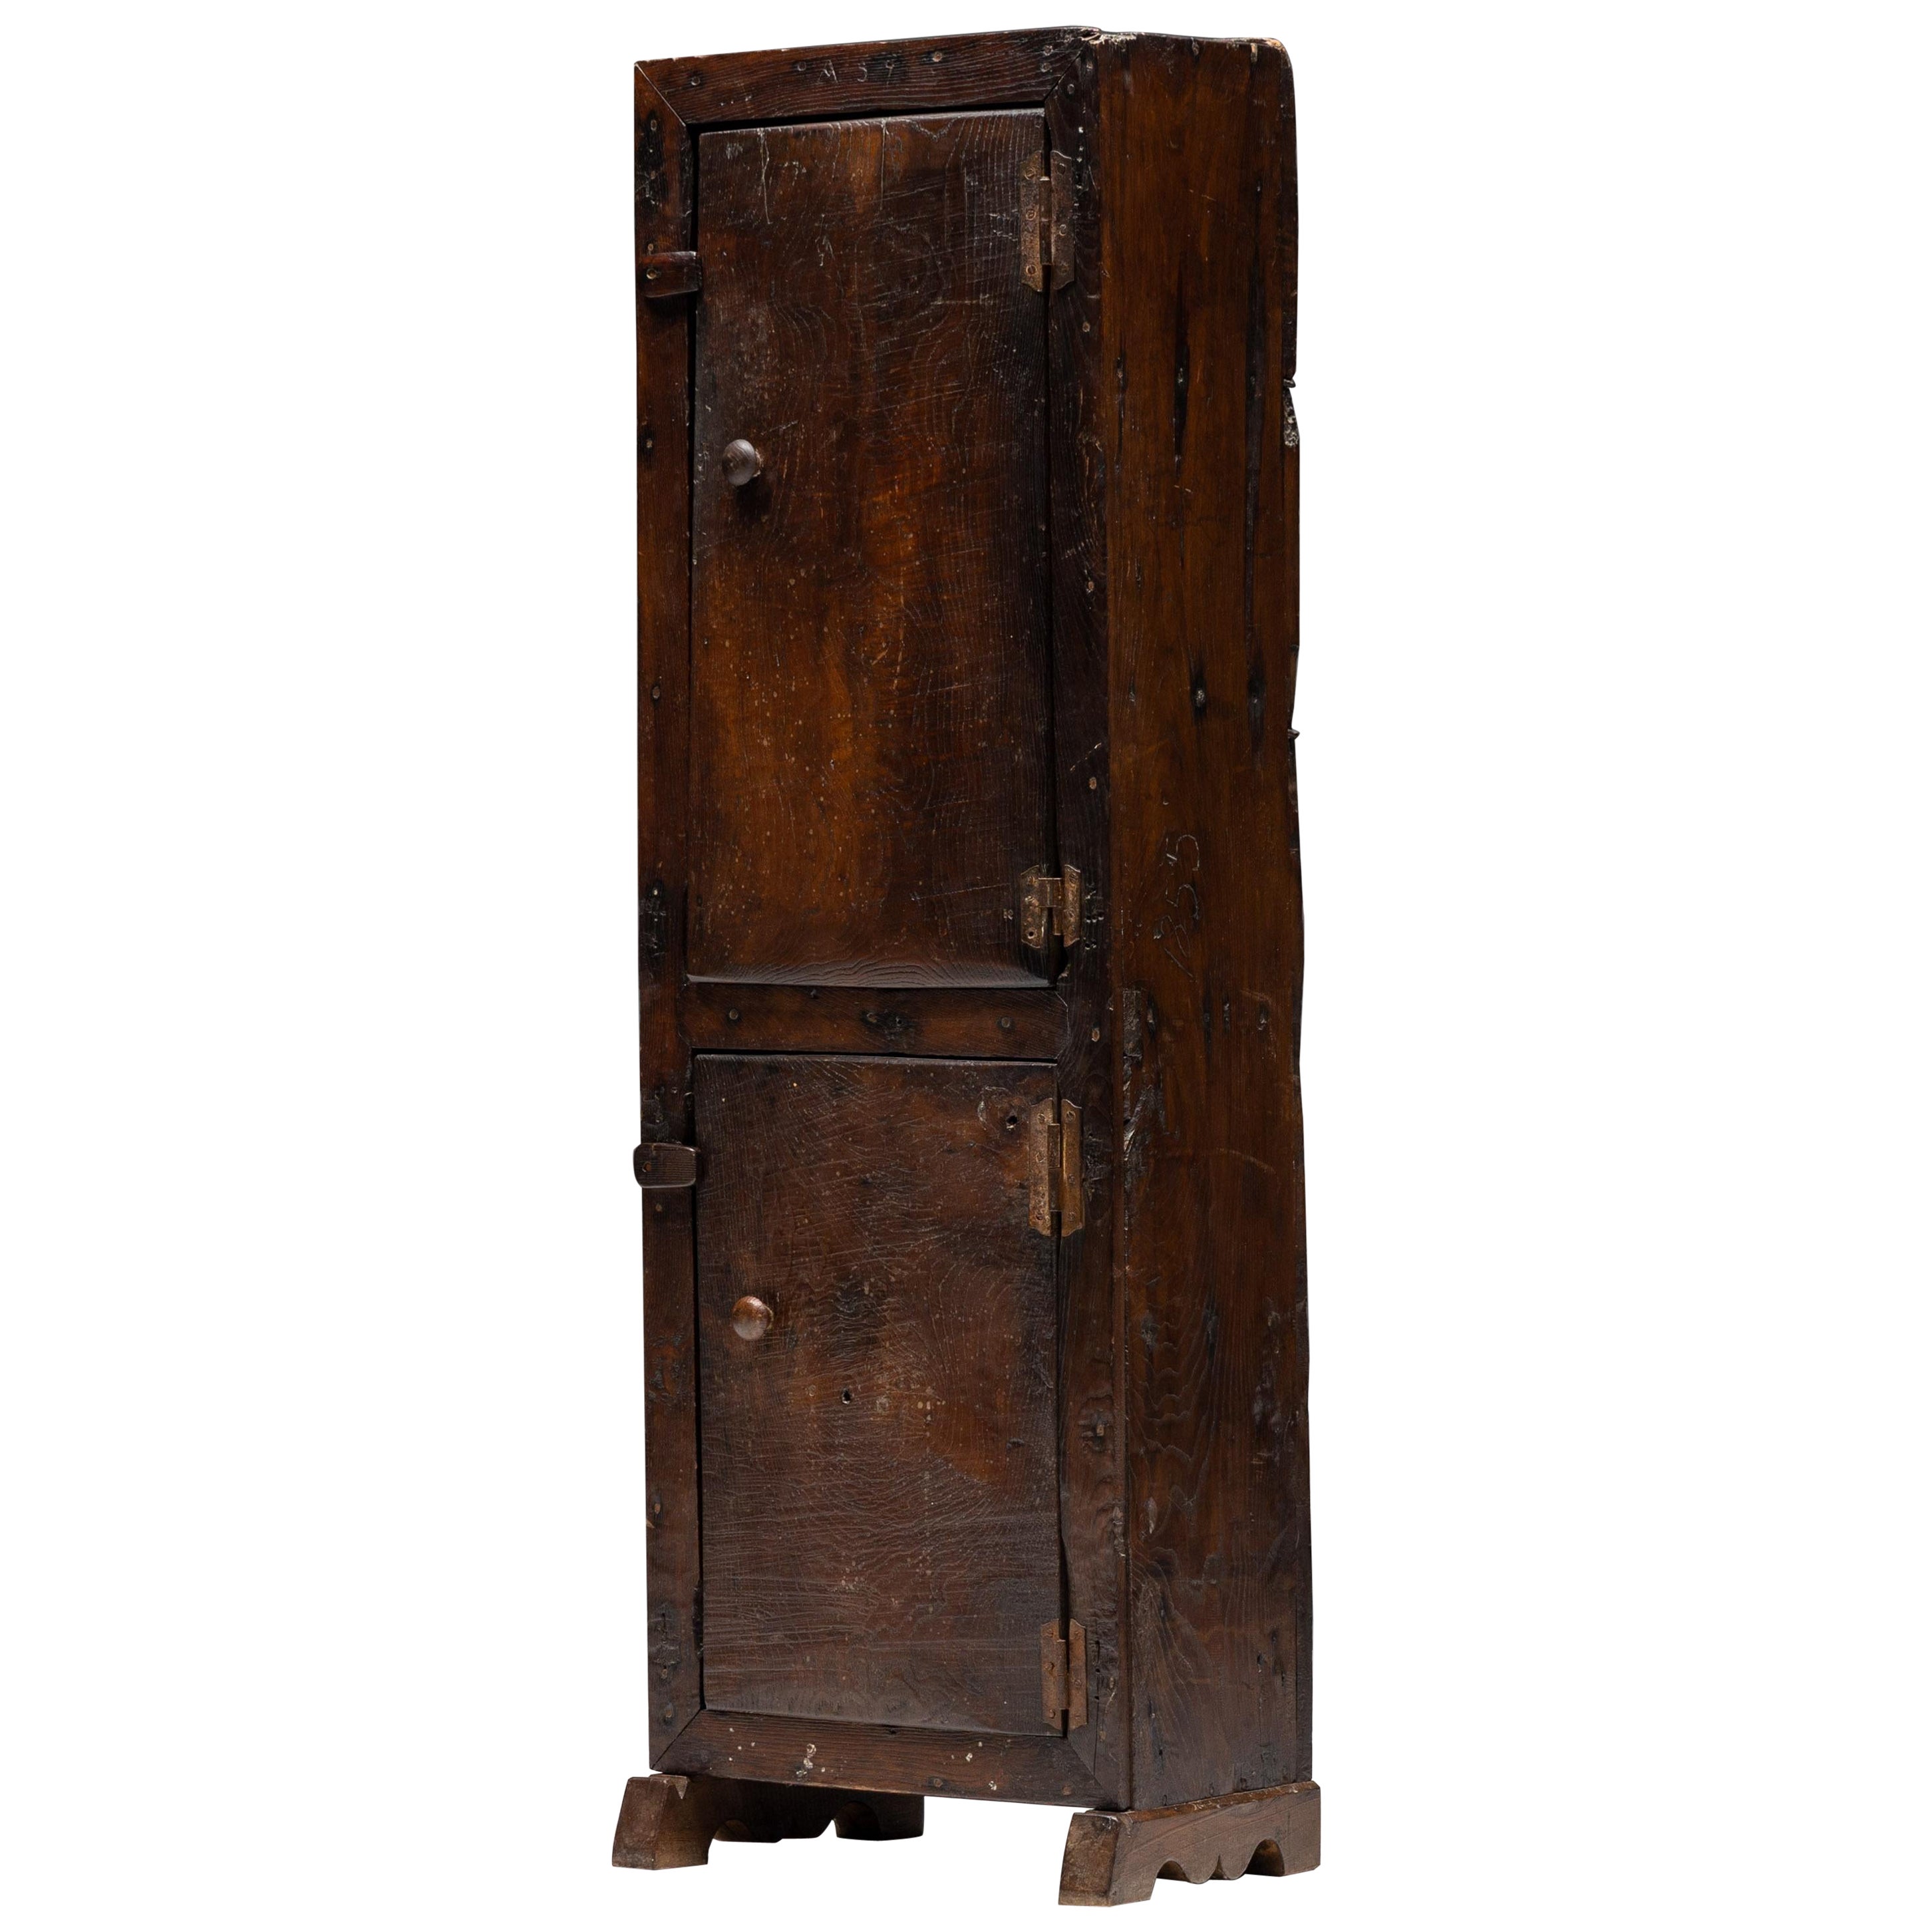 Rustic Travail Populaire Cabinet, France, 1850s